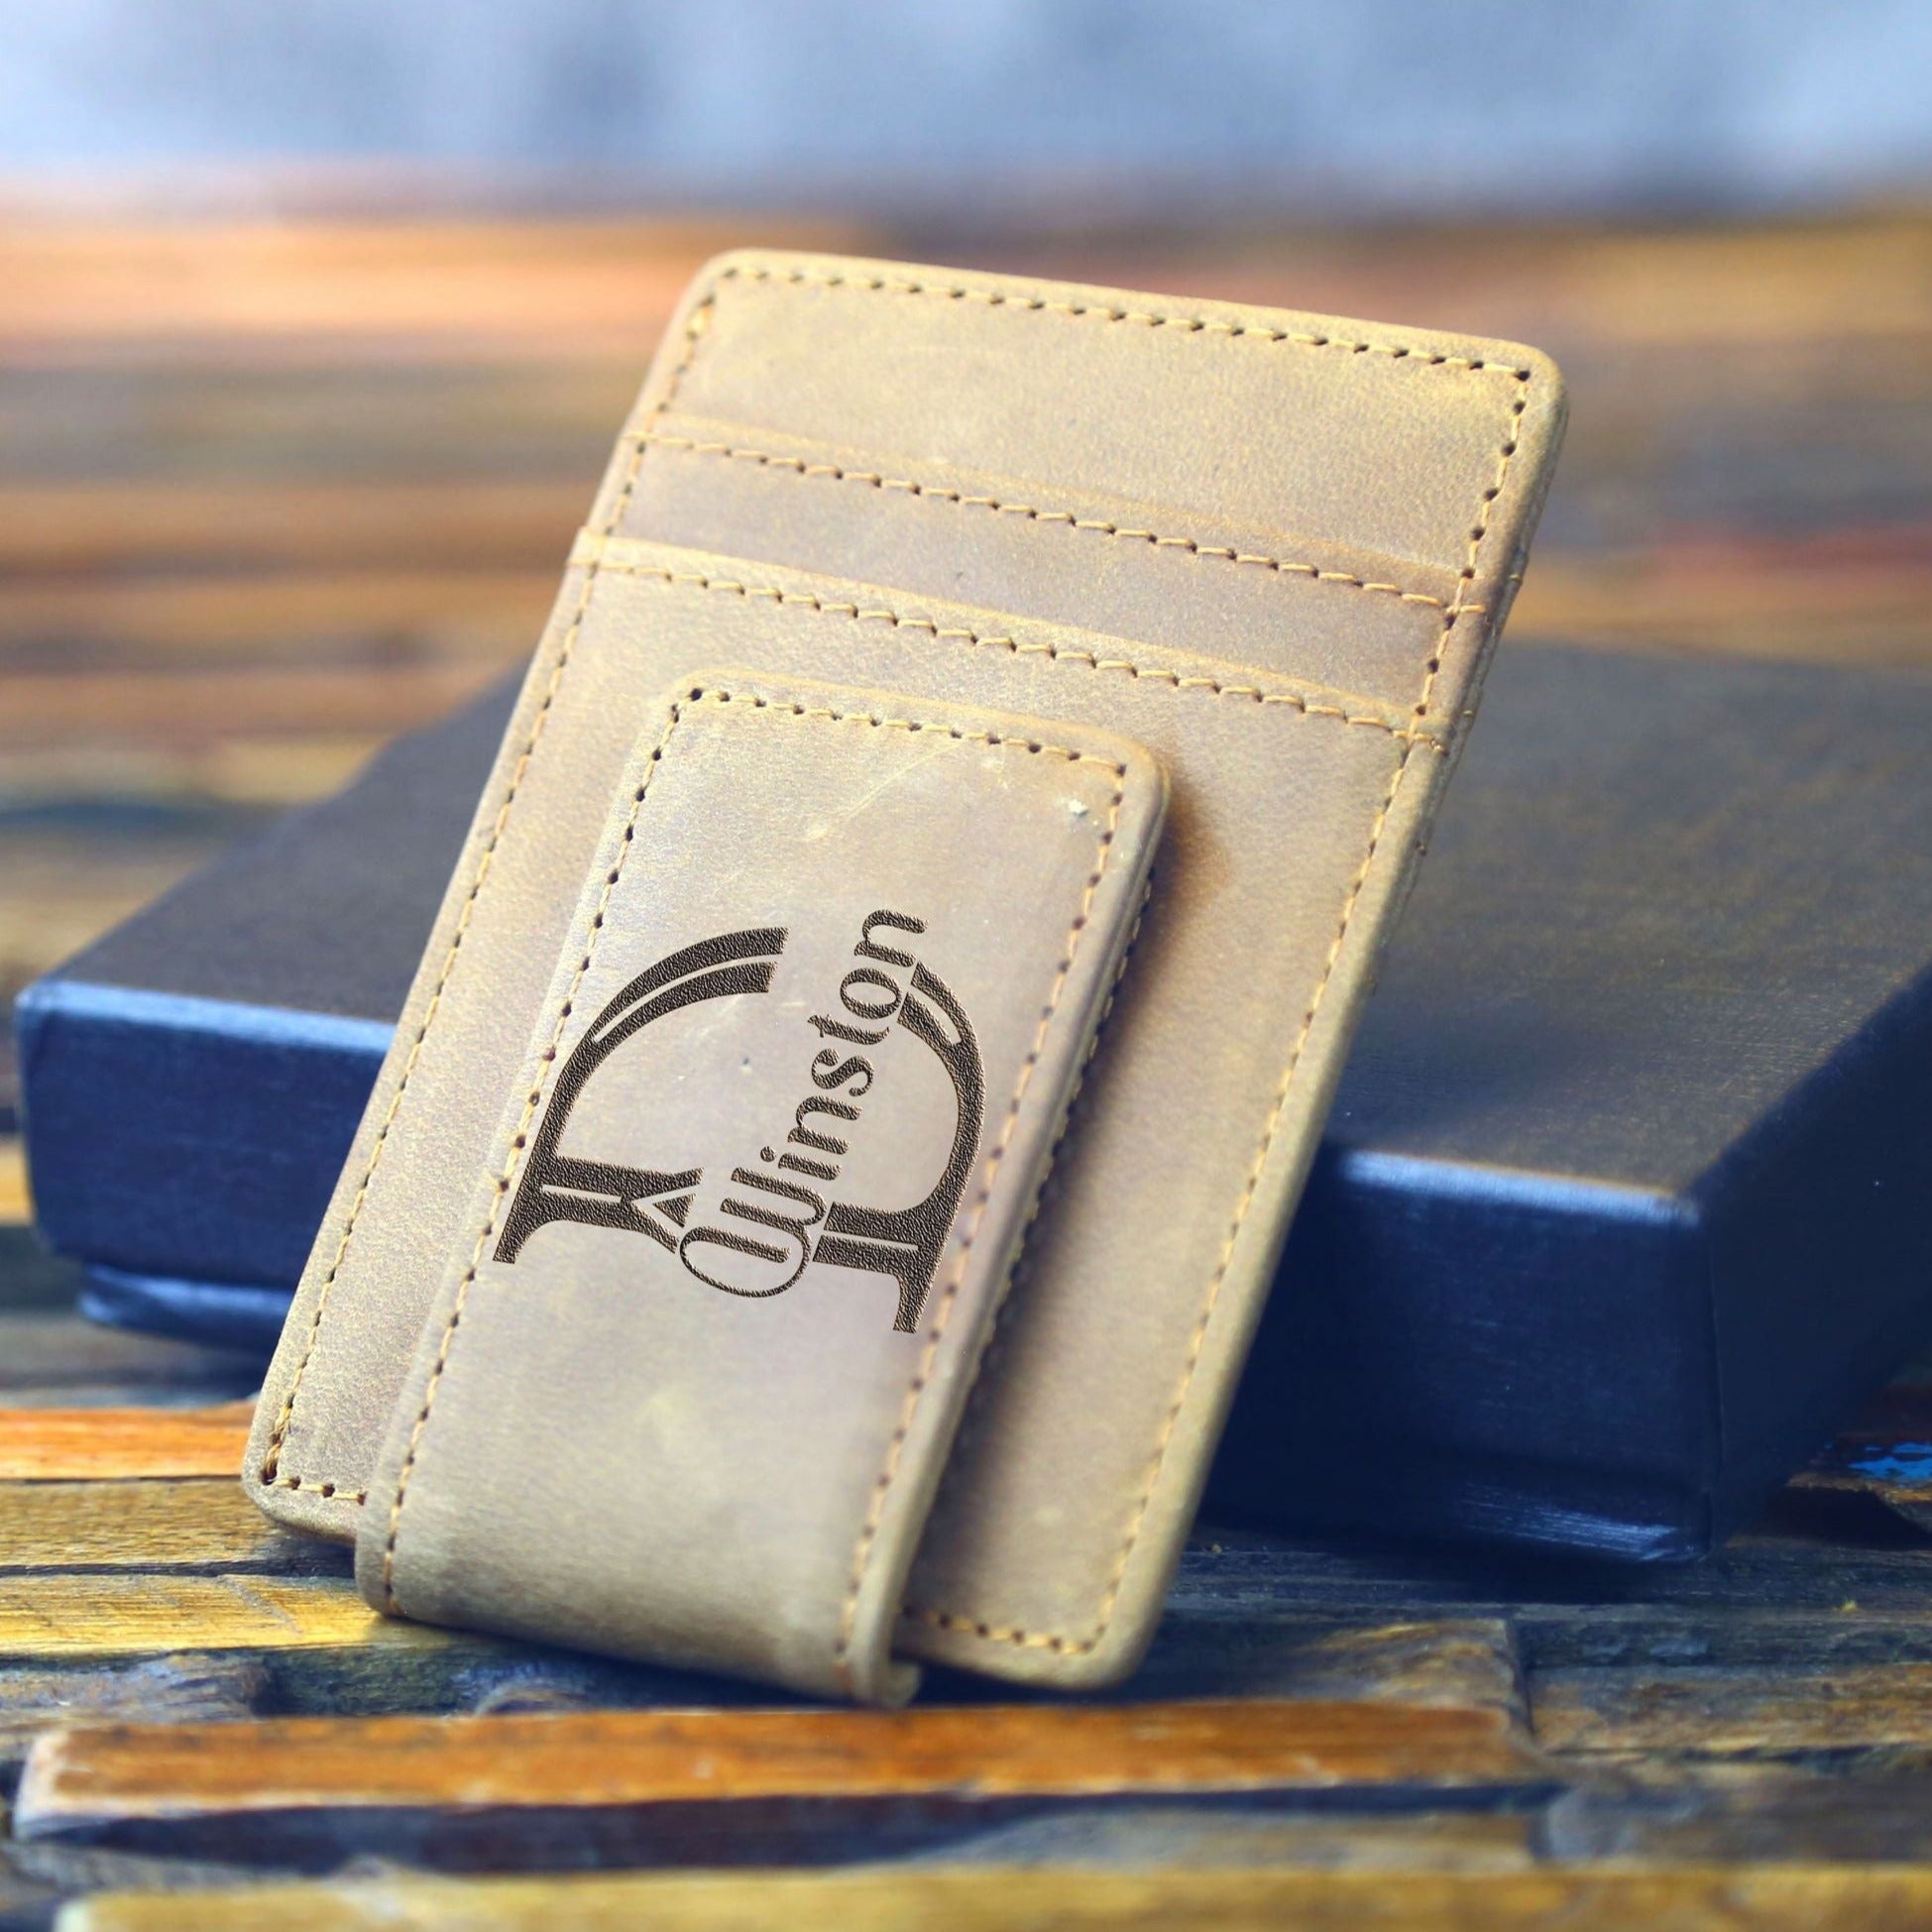 Personalized Leather Money Clip Wallet